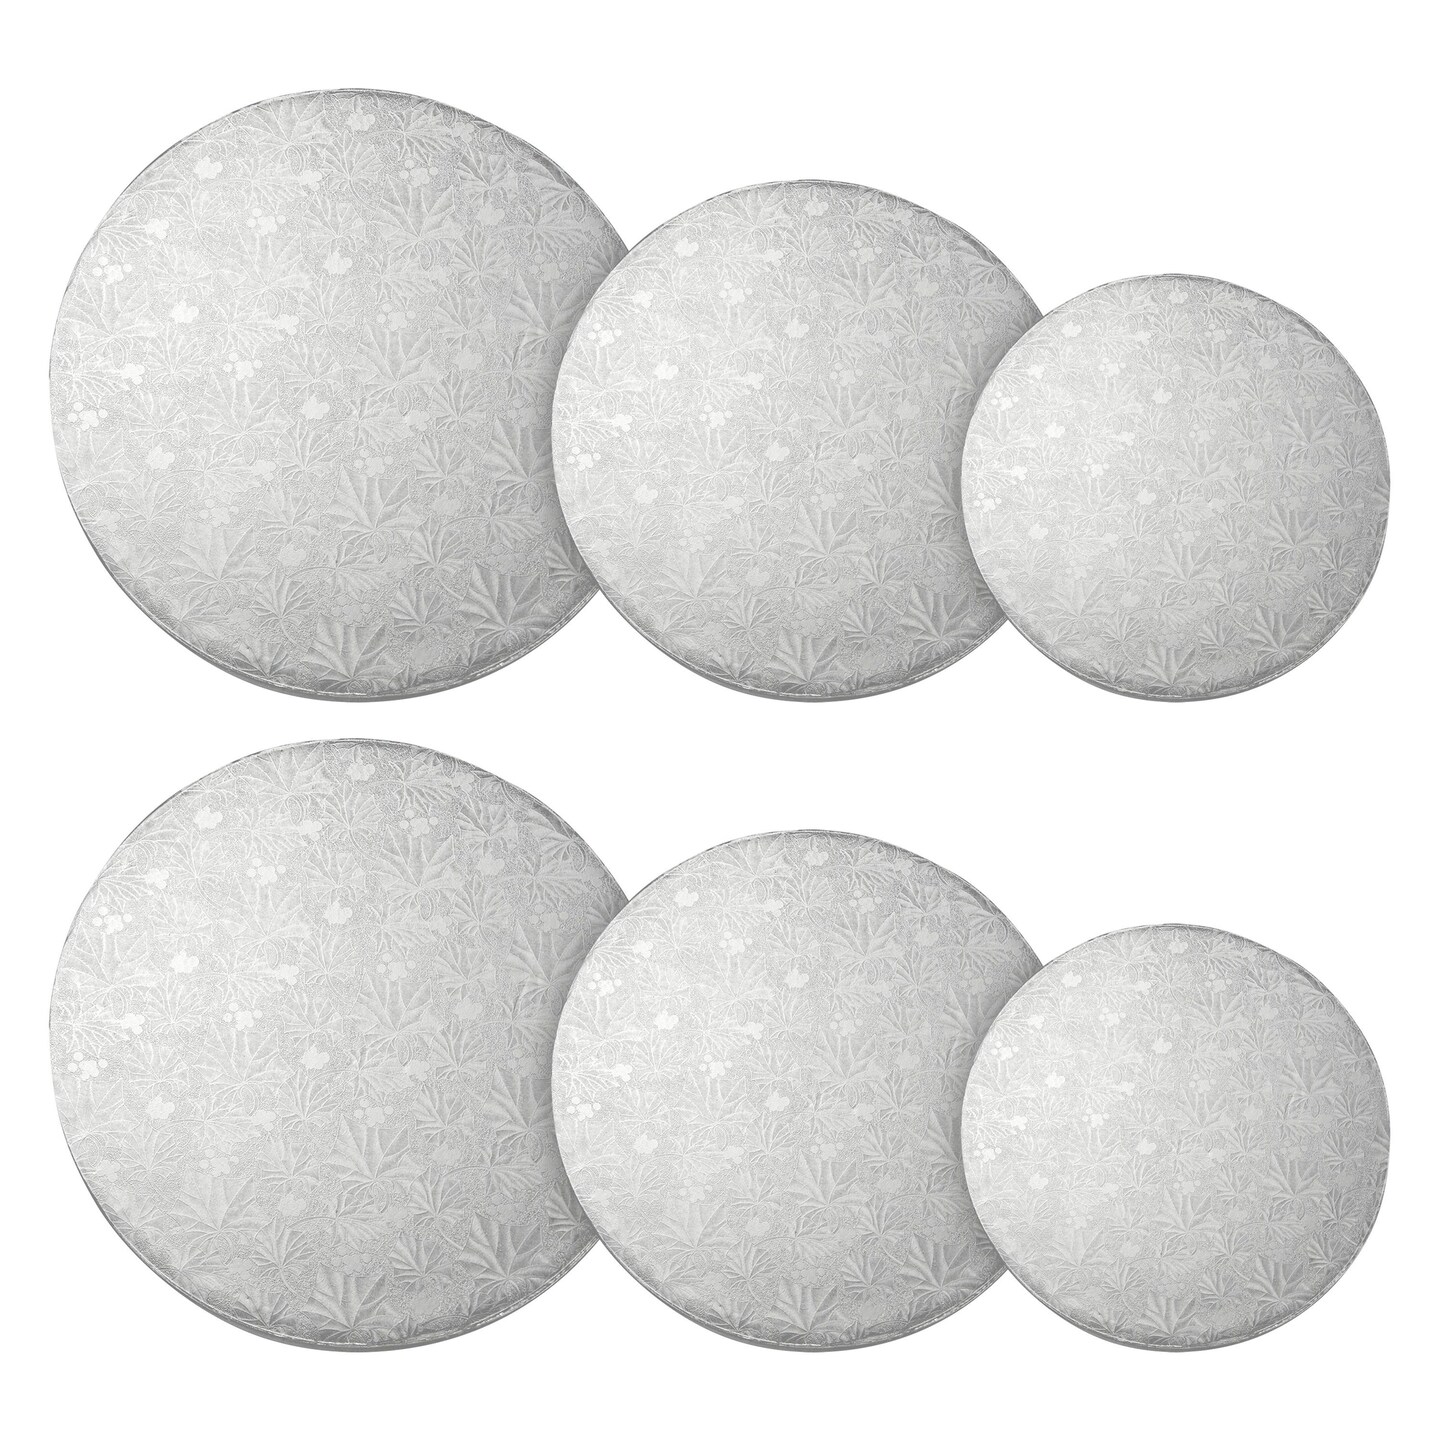 Set of 6 Silver Cake Drums, 8, 10 and 12 Inch Round Boards for Baking (2 of Each Size)